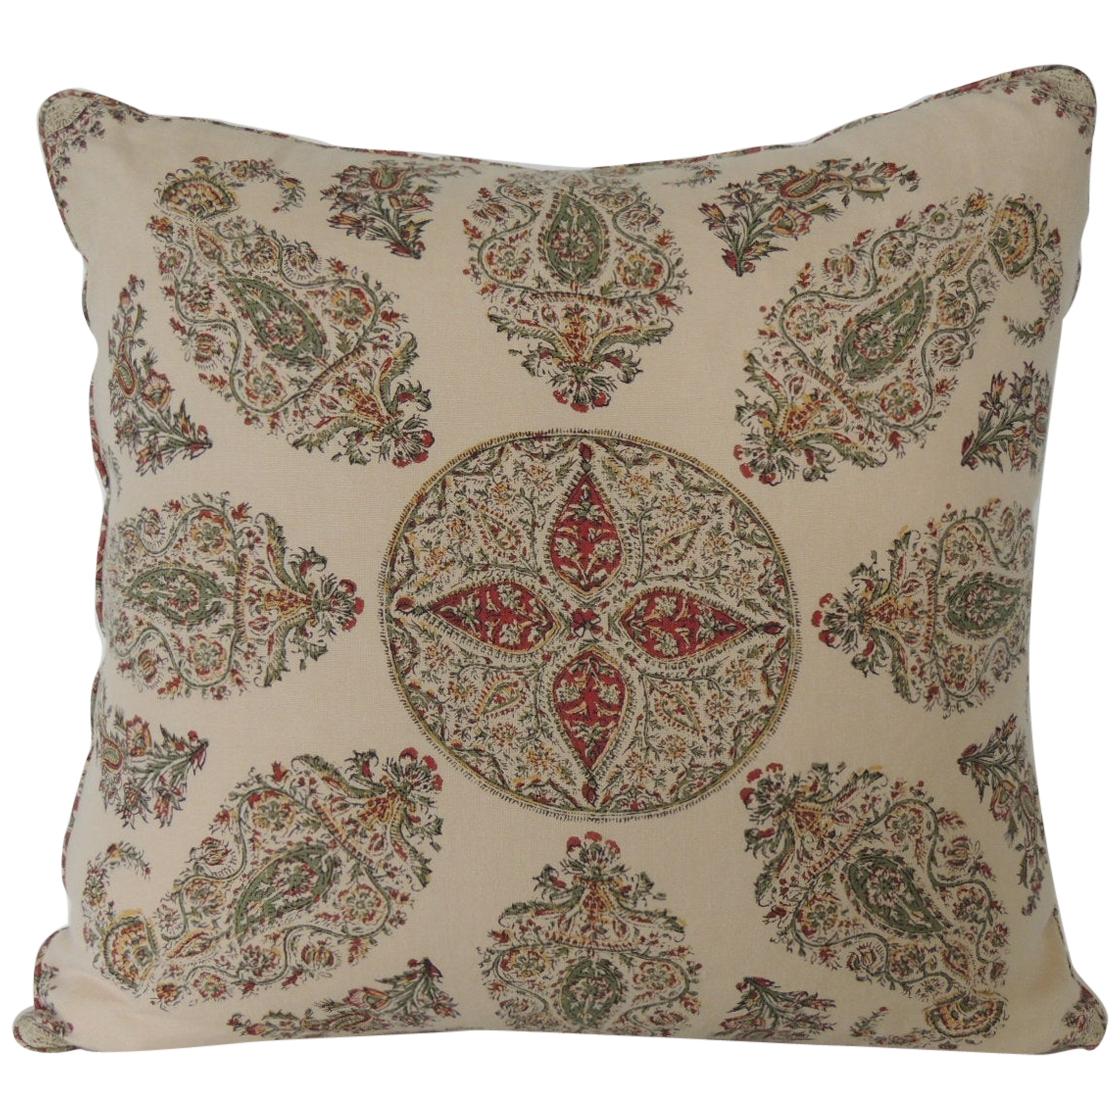 Green and Red Linen Paisley Decorative Square Pillow with Self-Welt